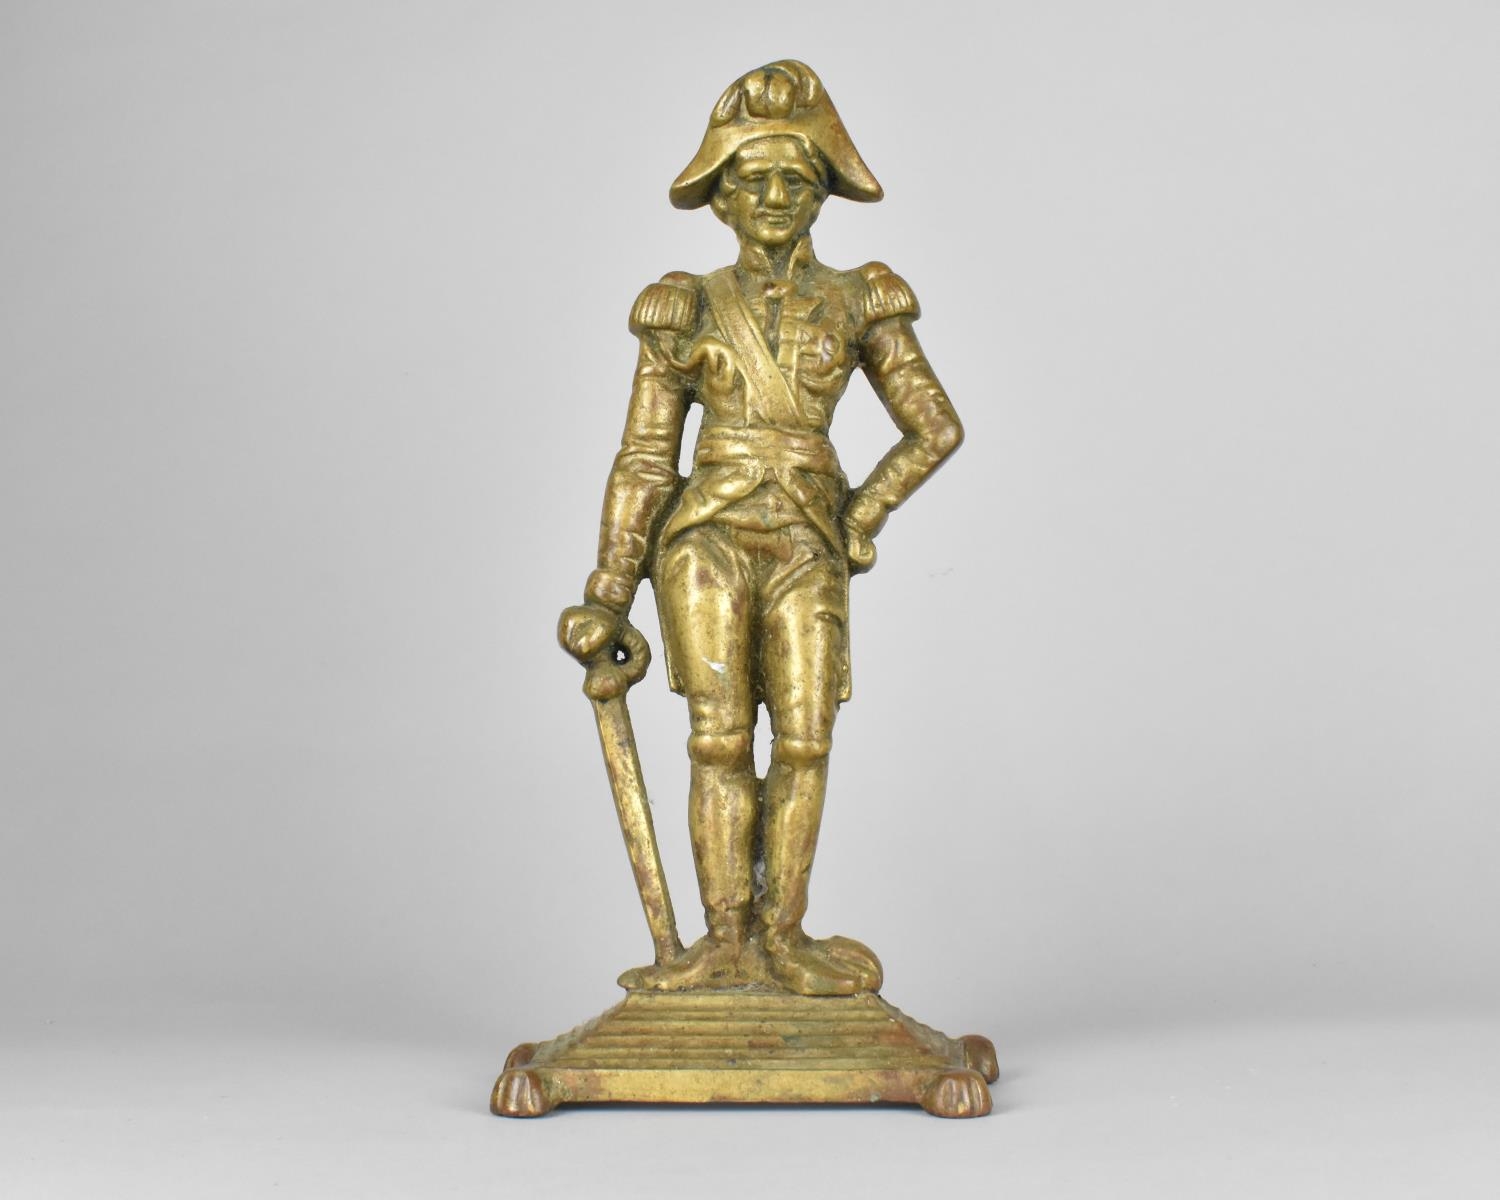 A Cast Brass Door Porter in the From of The Duke of Wellington, 33cms High